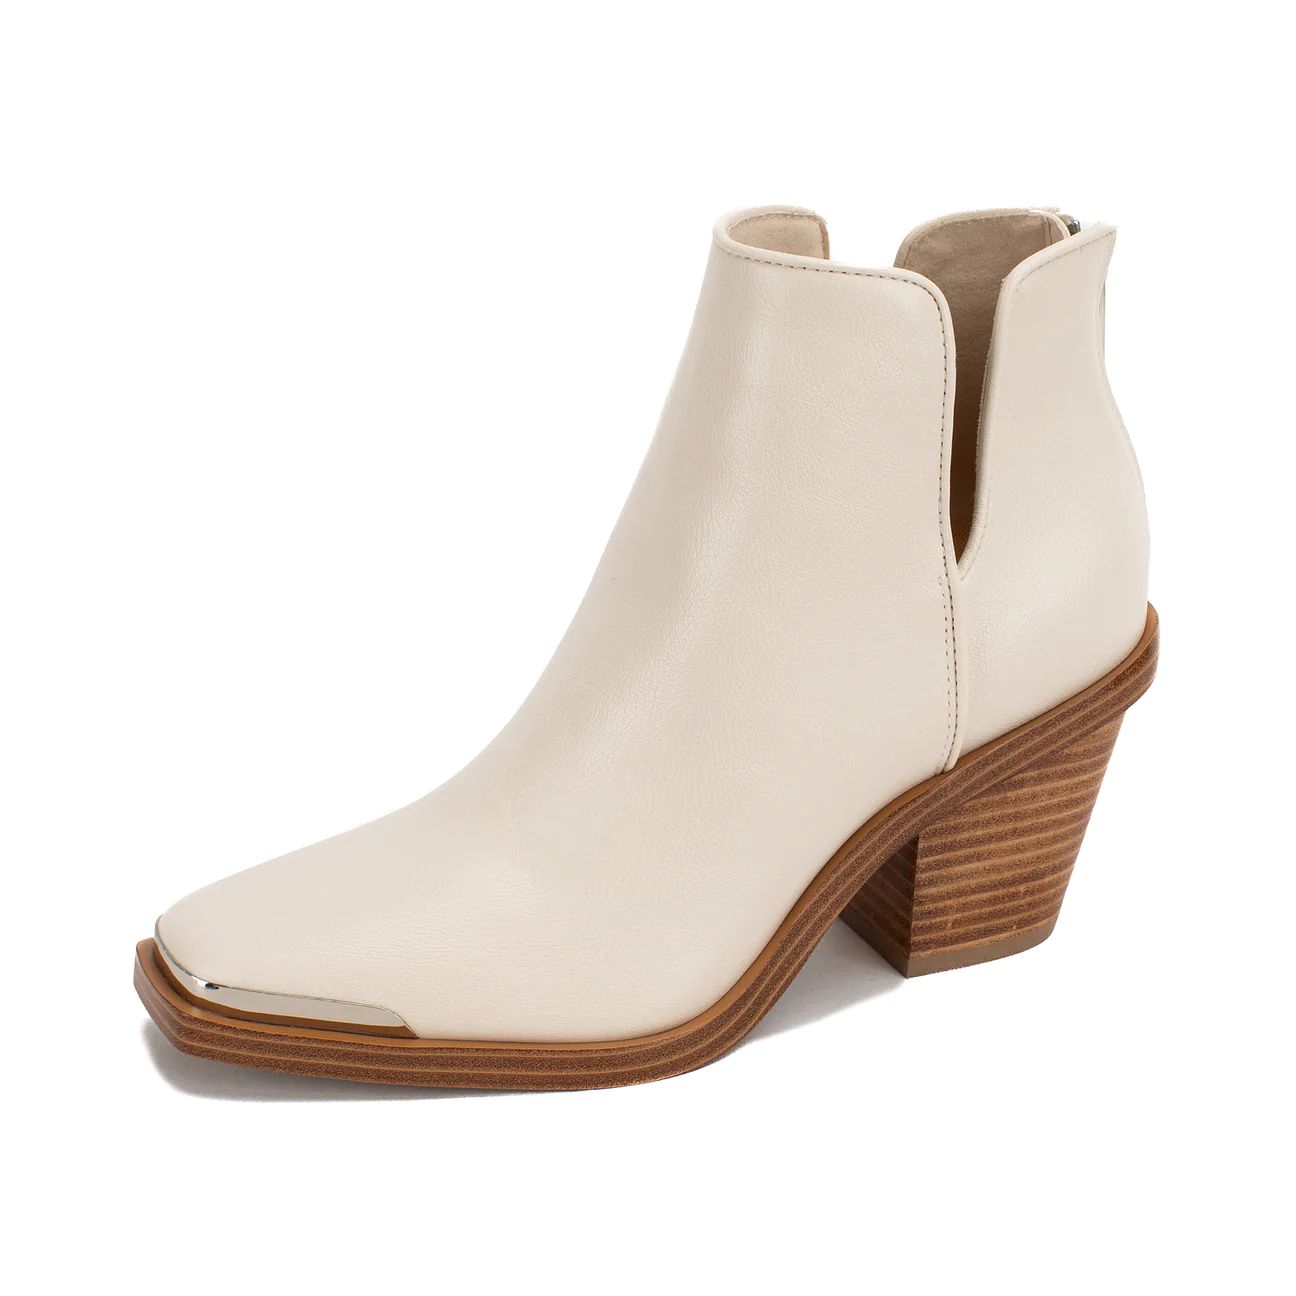 Valeska Cut-out Bootie | Yellow Box Official Site | Yellow Box